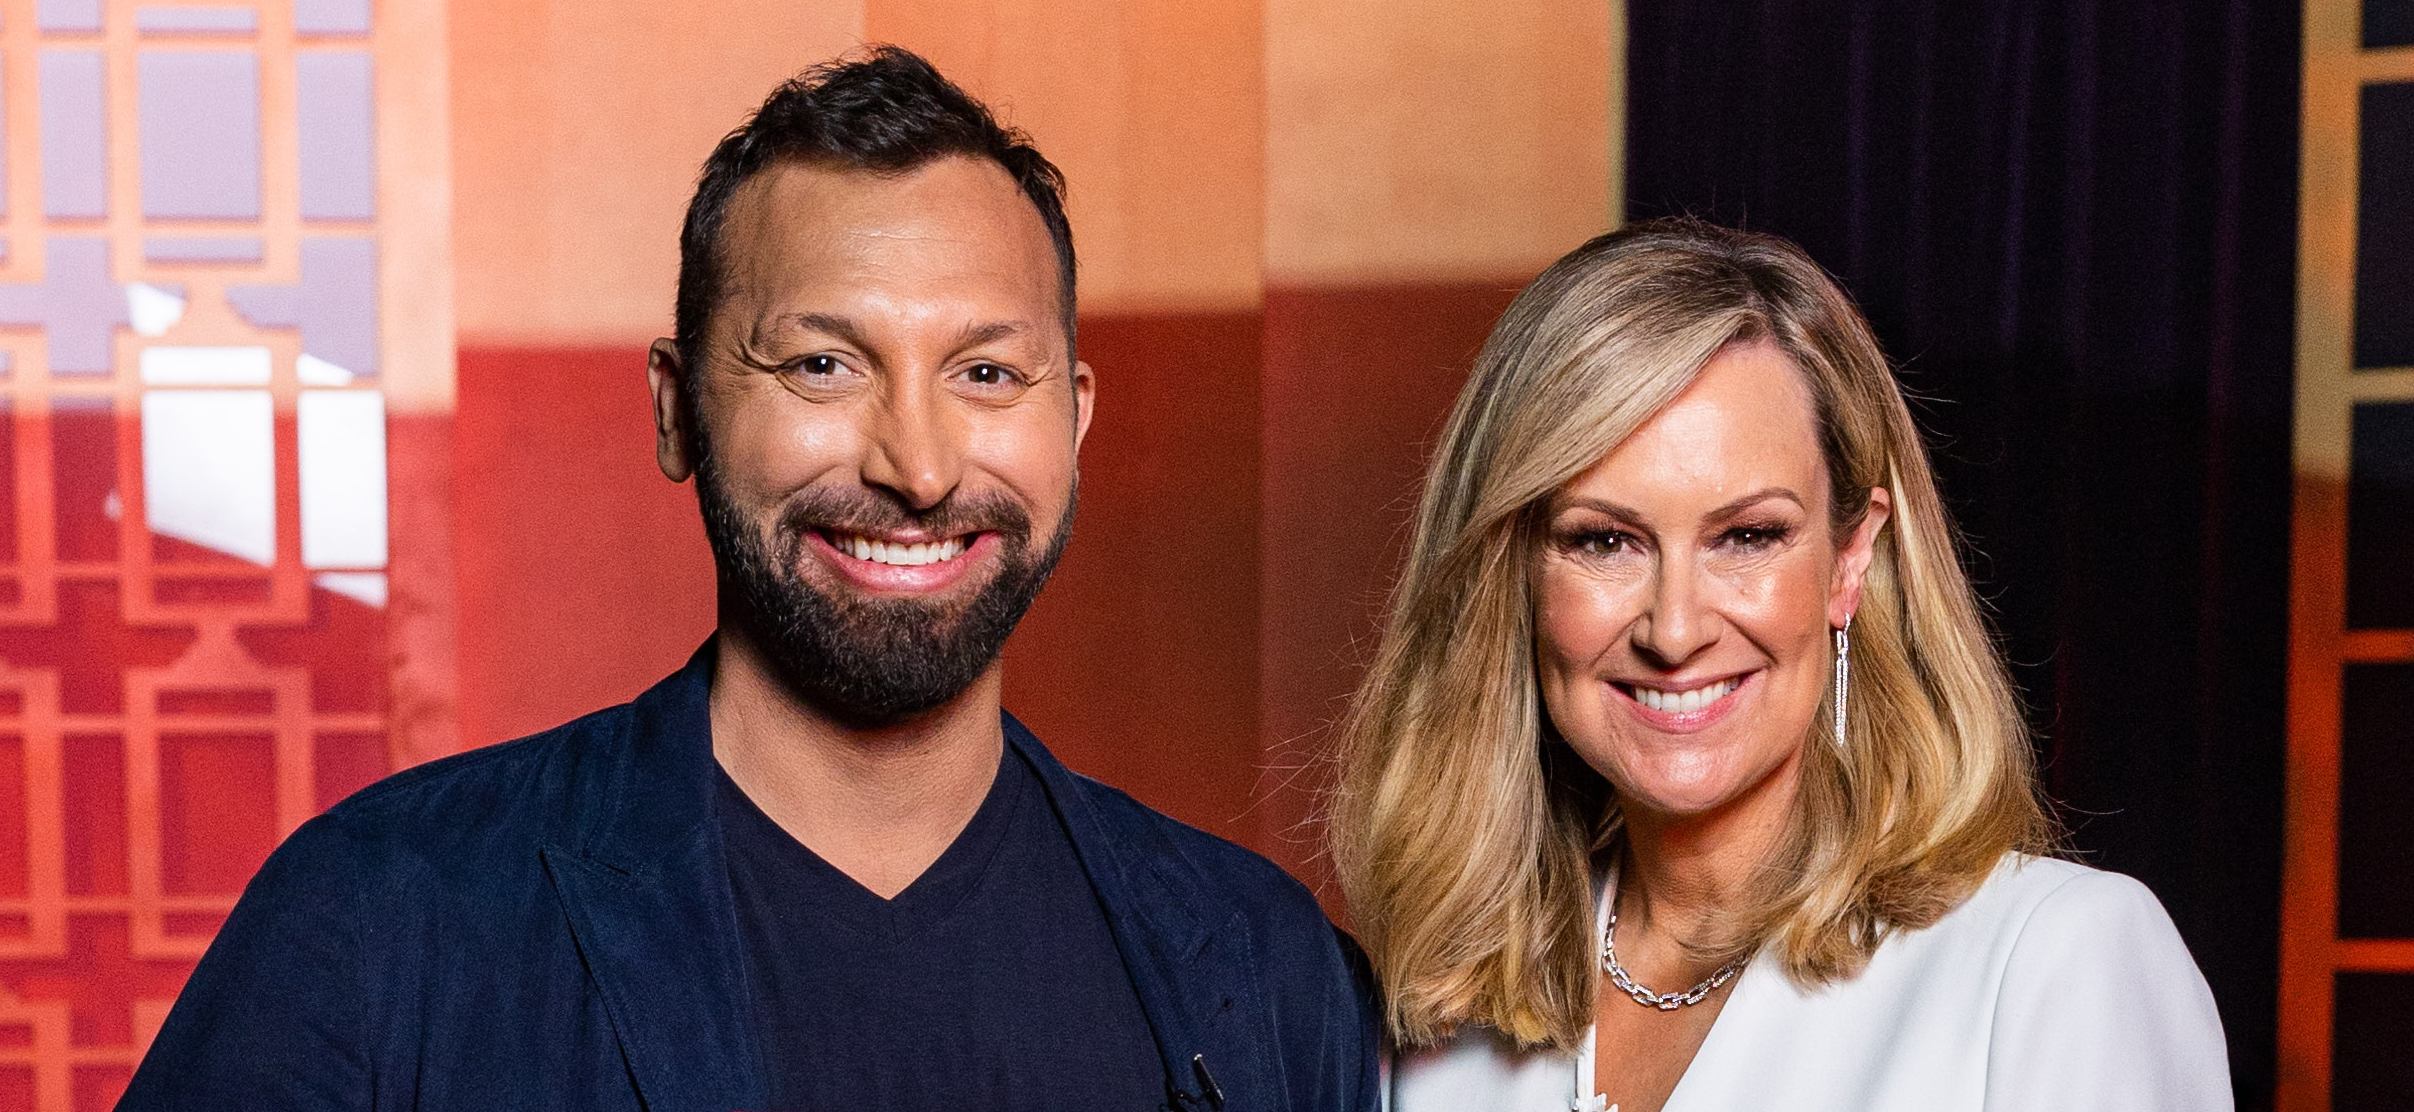 Ian Thorpe Talks Armed Stalker on ‘This is Your Life’